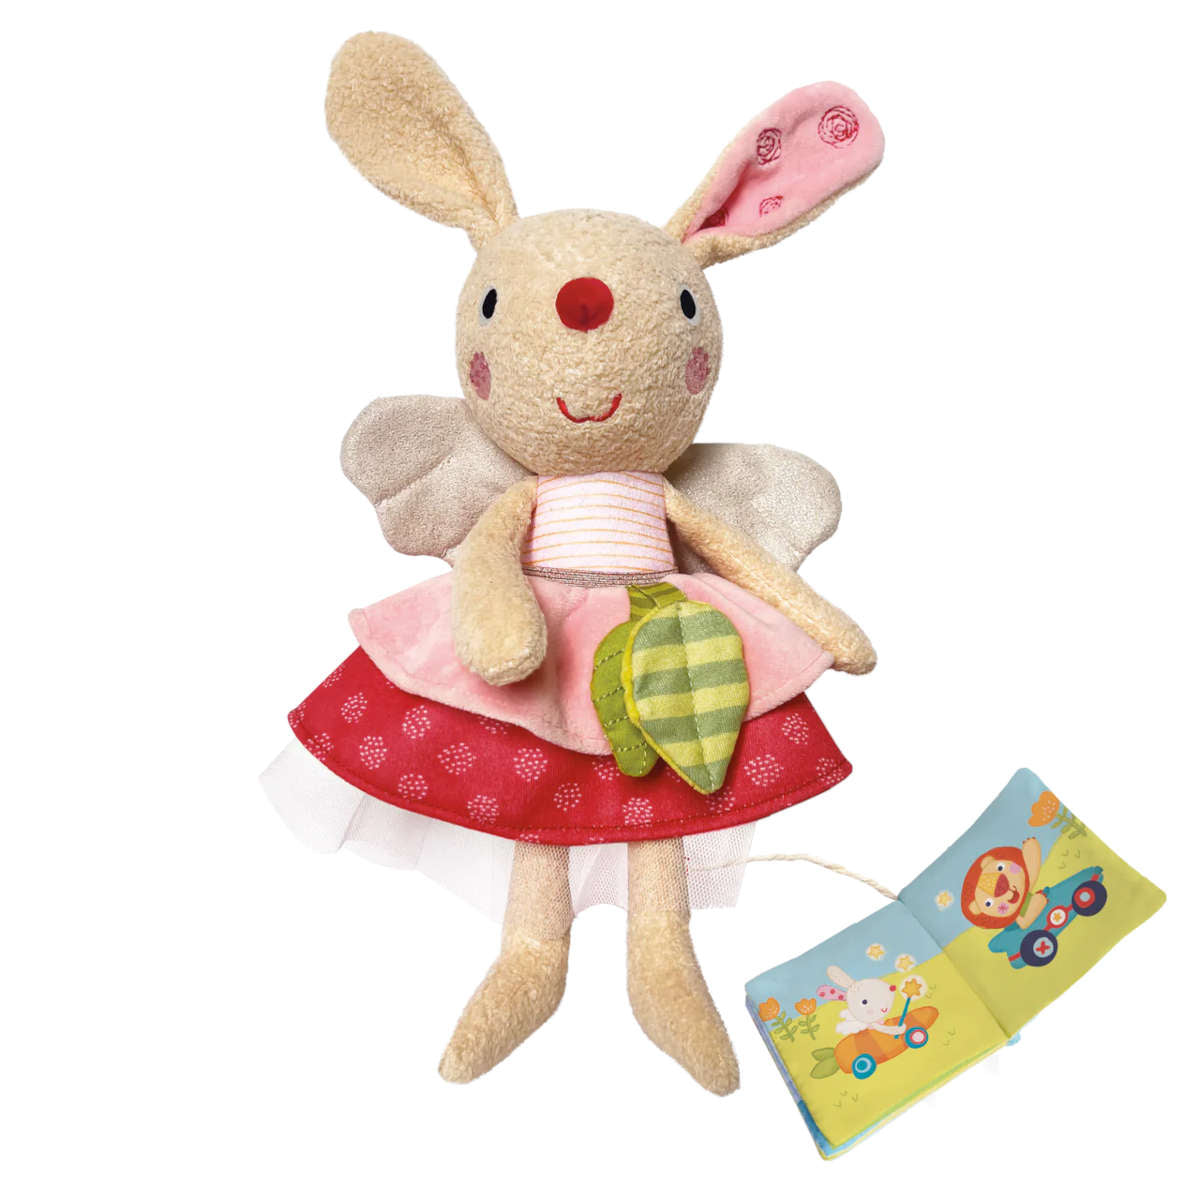 Bababoo and Friends Best Friend Pippa Plush Toy